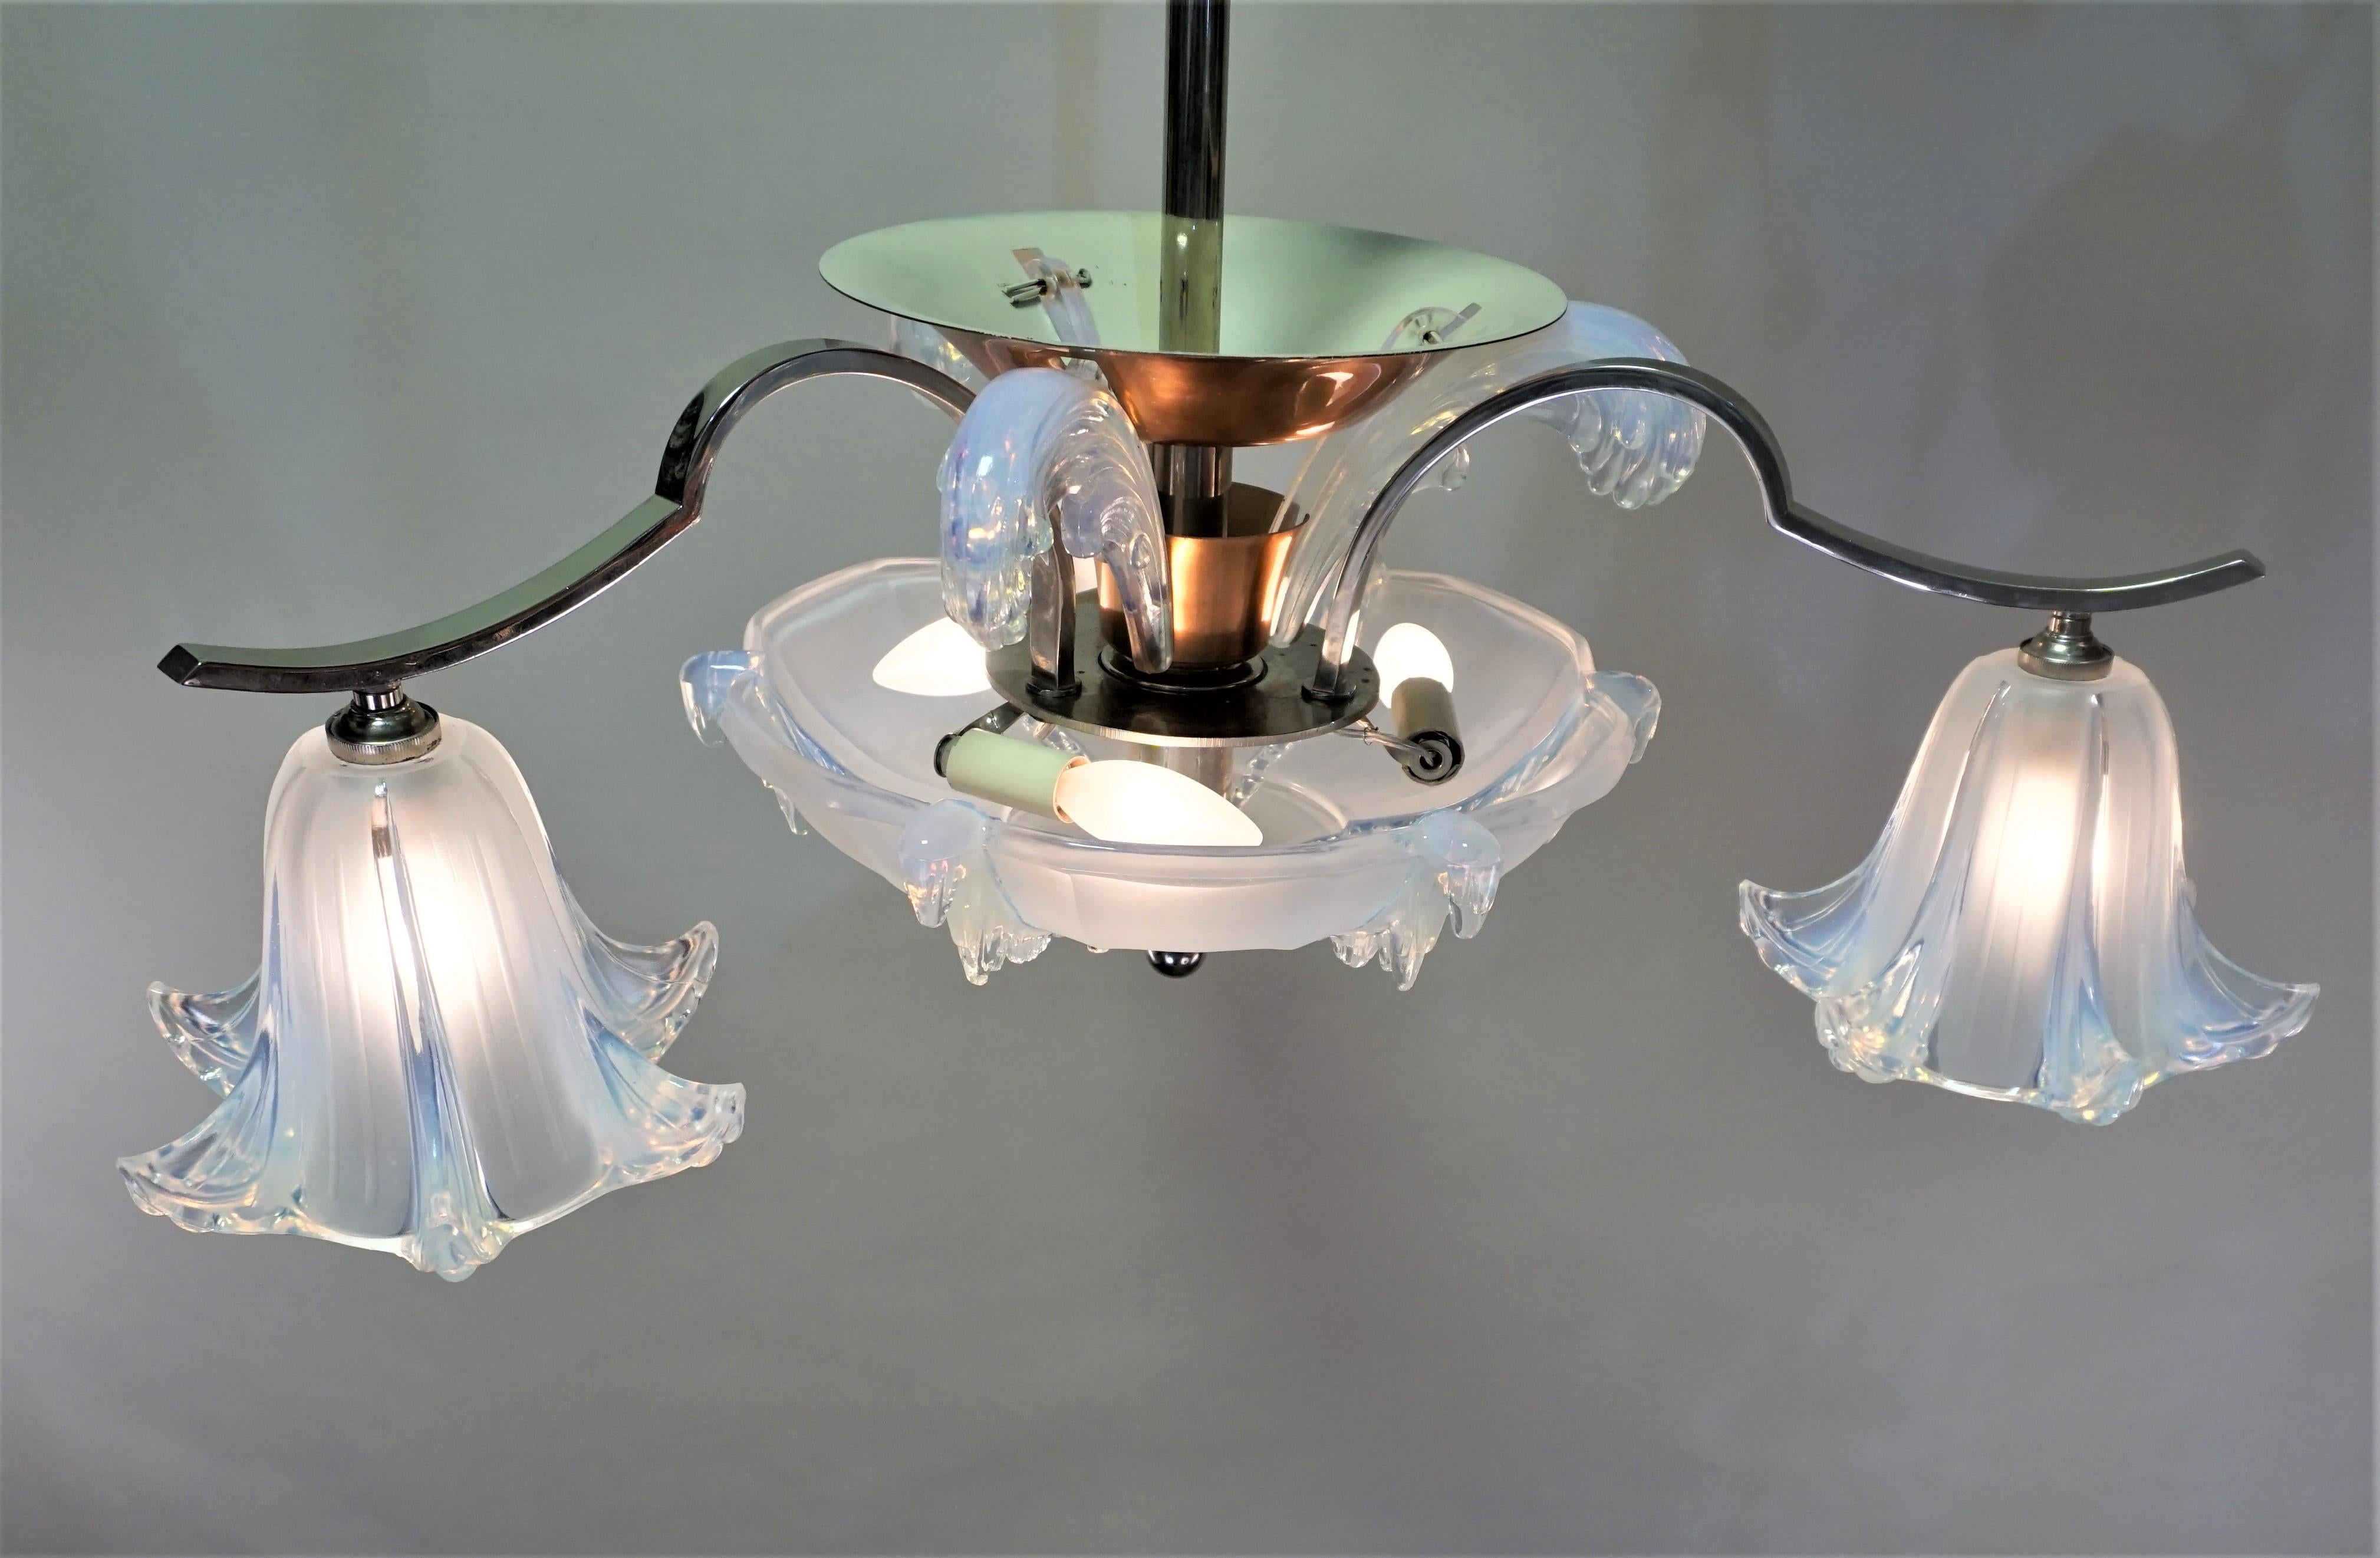 Copper French 1930s Art Deco Chandelier with Opaline Glass Shades by Ezan